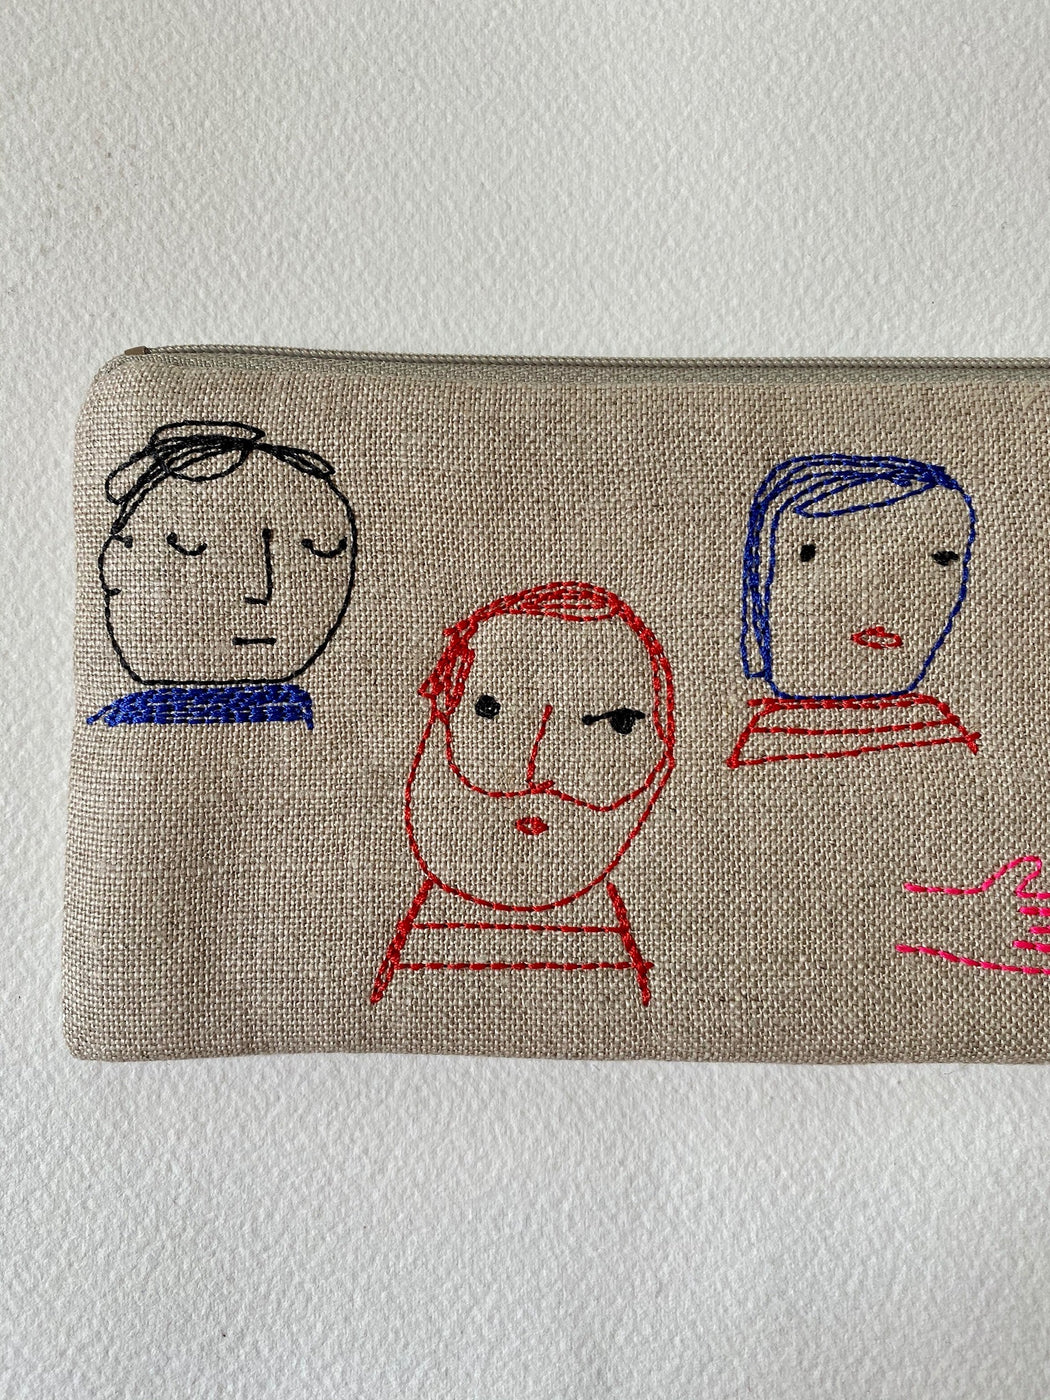 K Studio "Folks" Embroidered Pouch